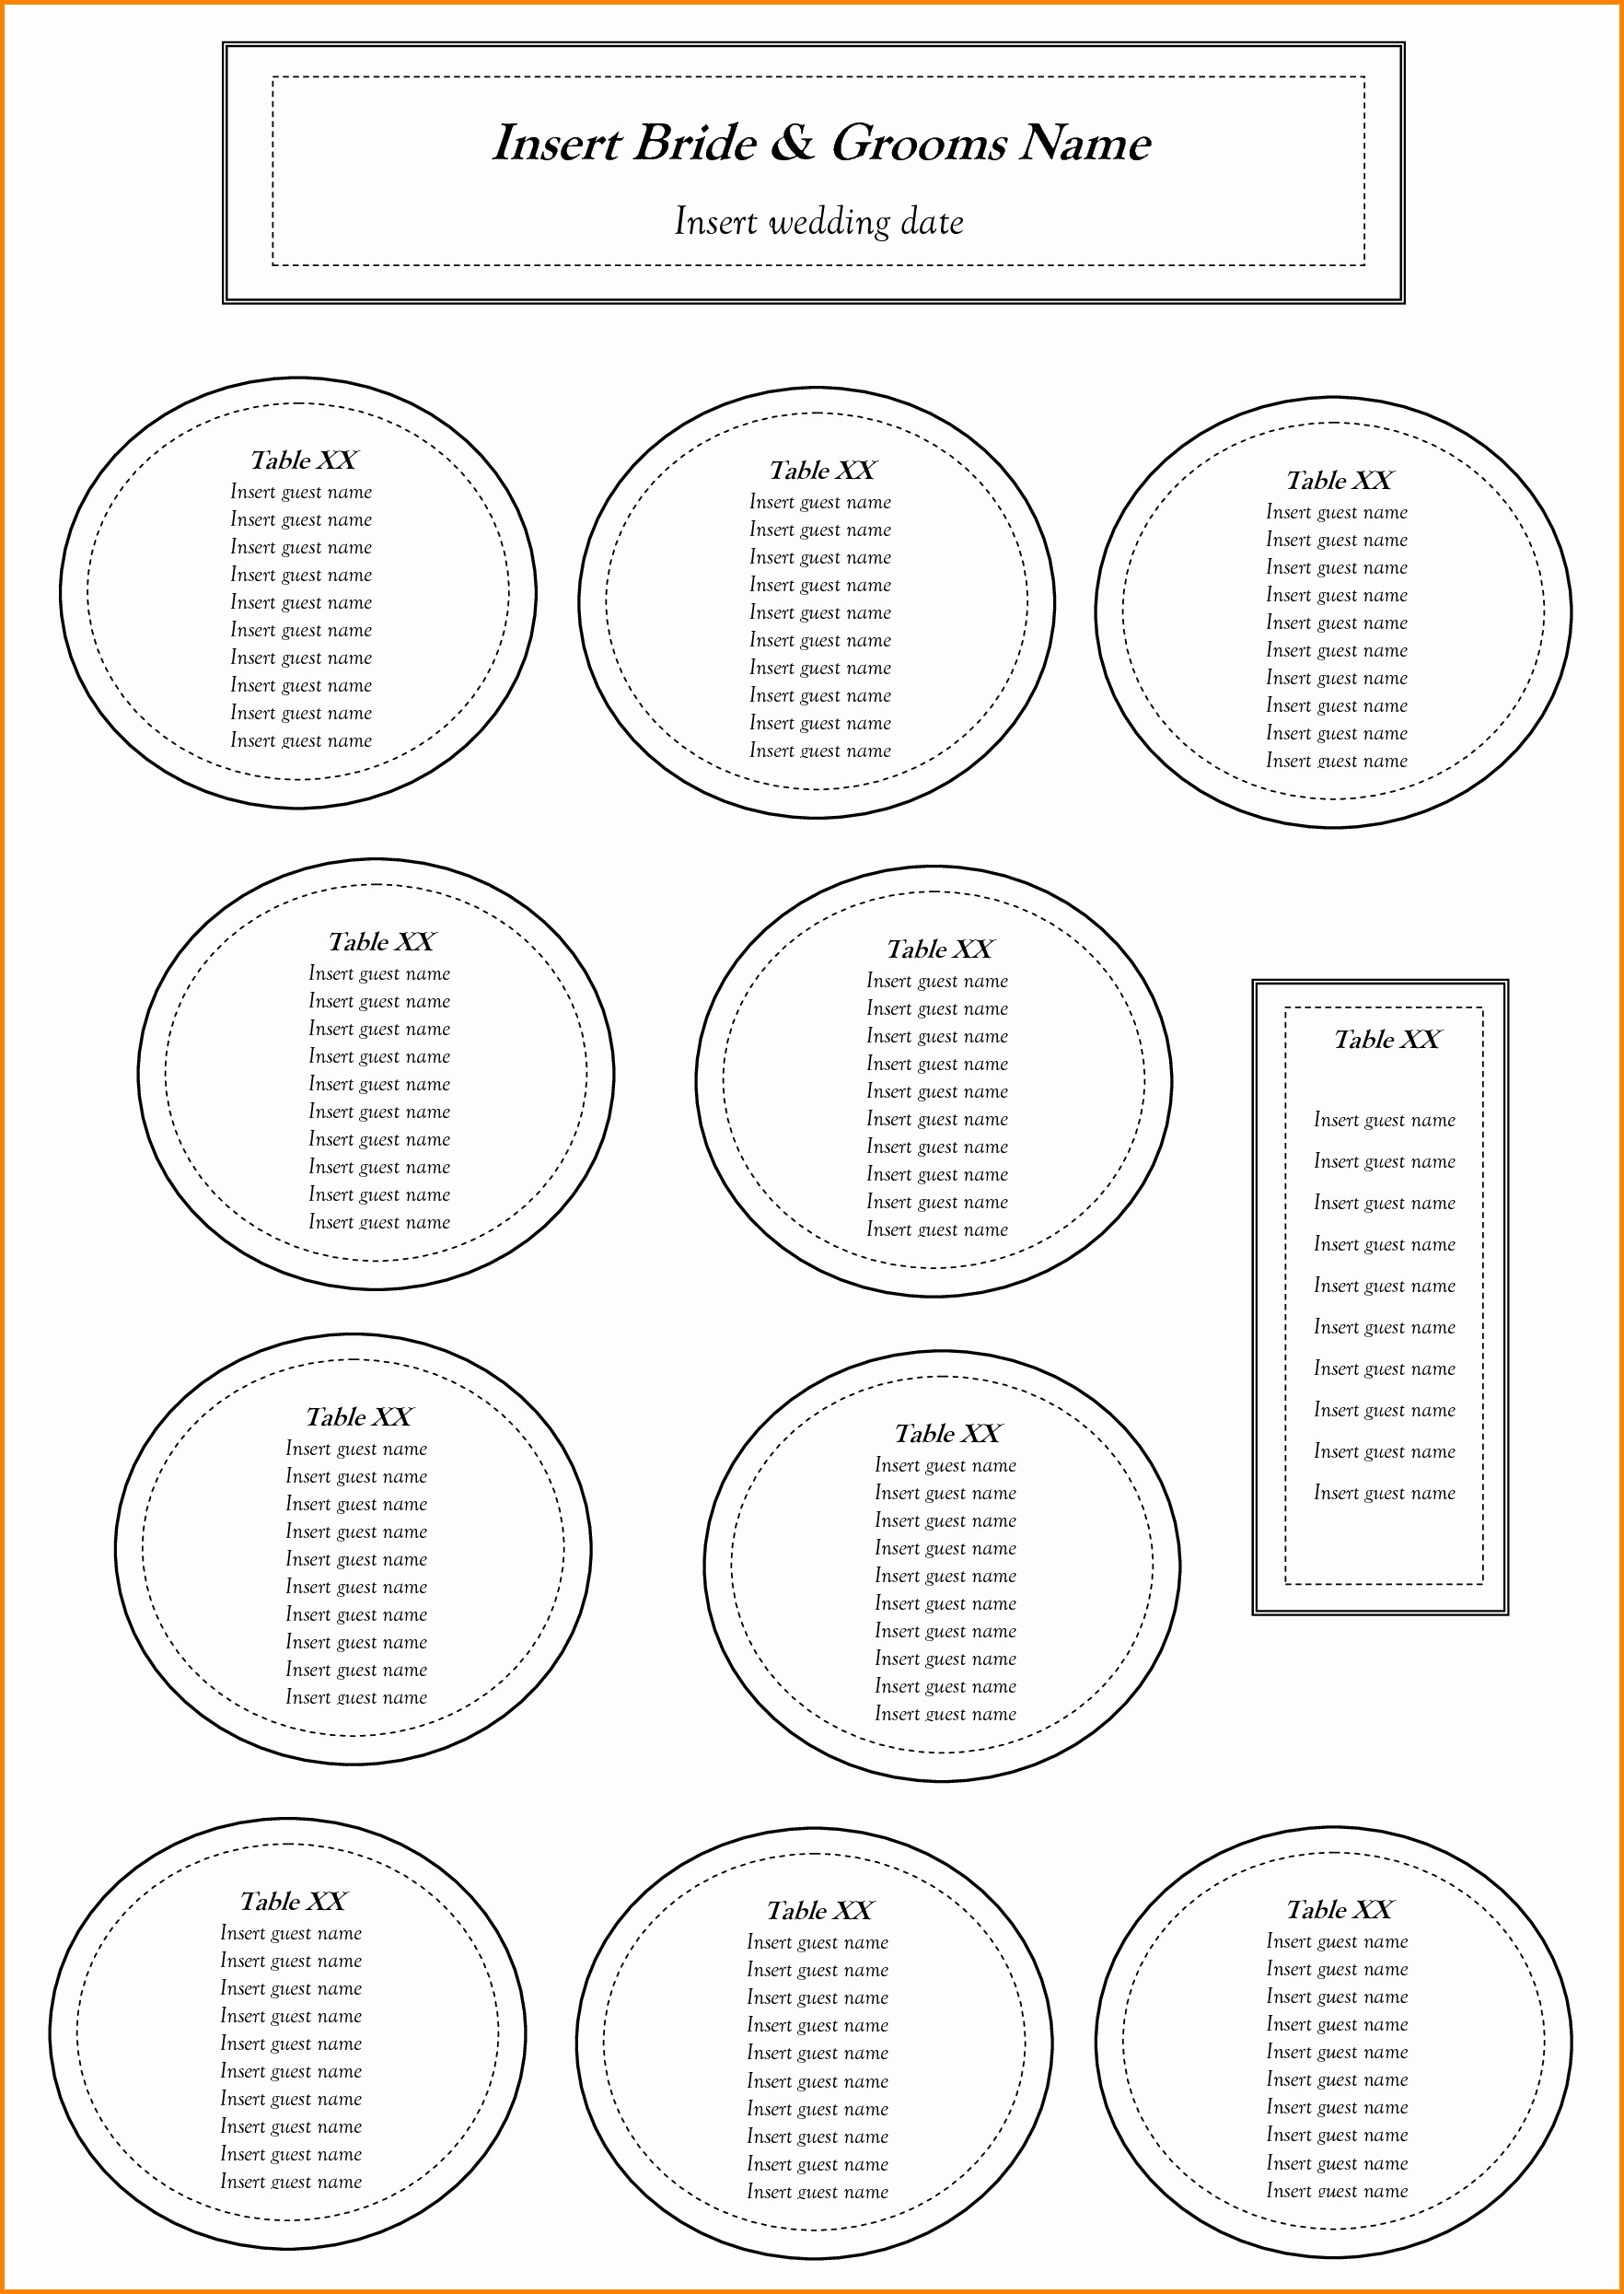 Wedding Seating Charts Templates Free Awesome Wedding Seating Chart Template